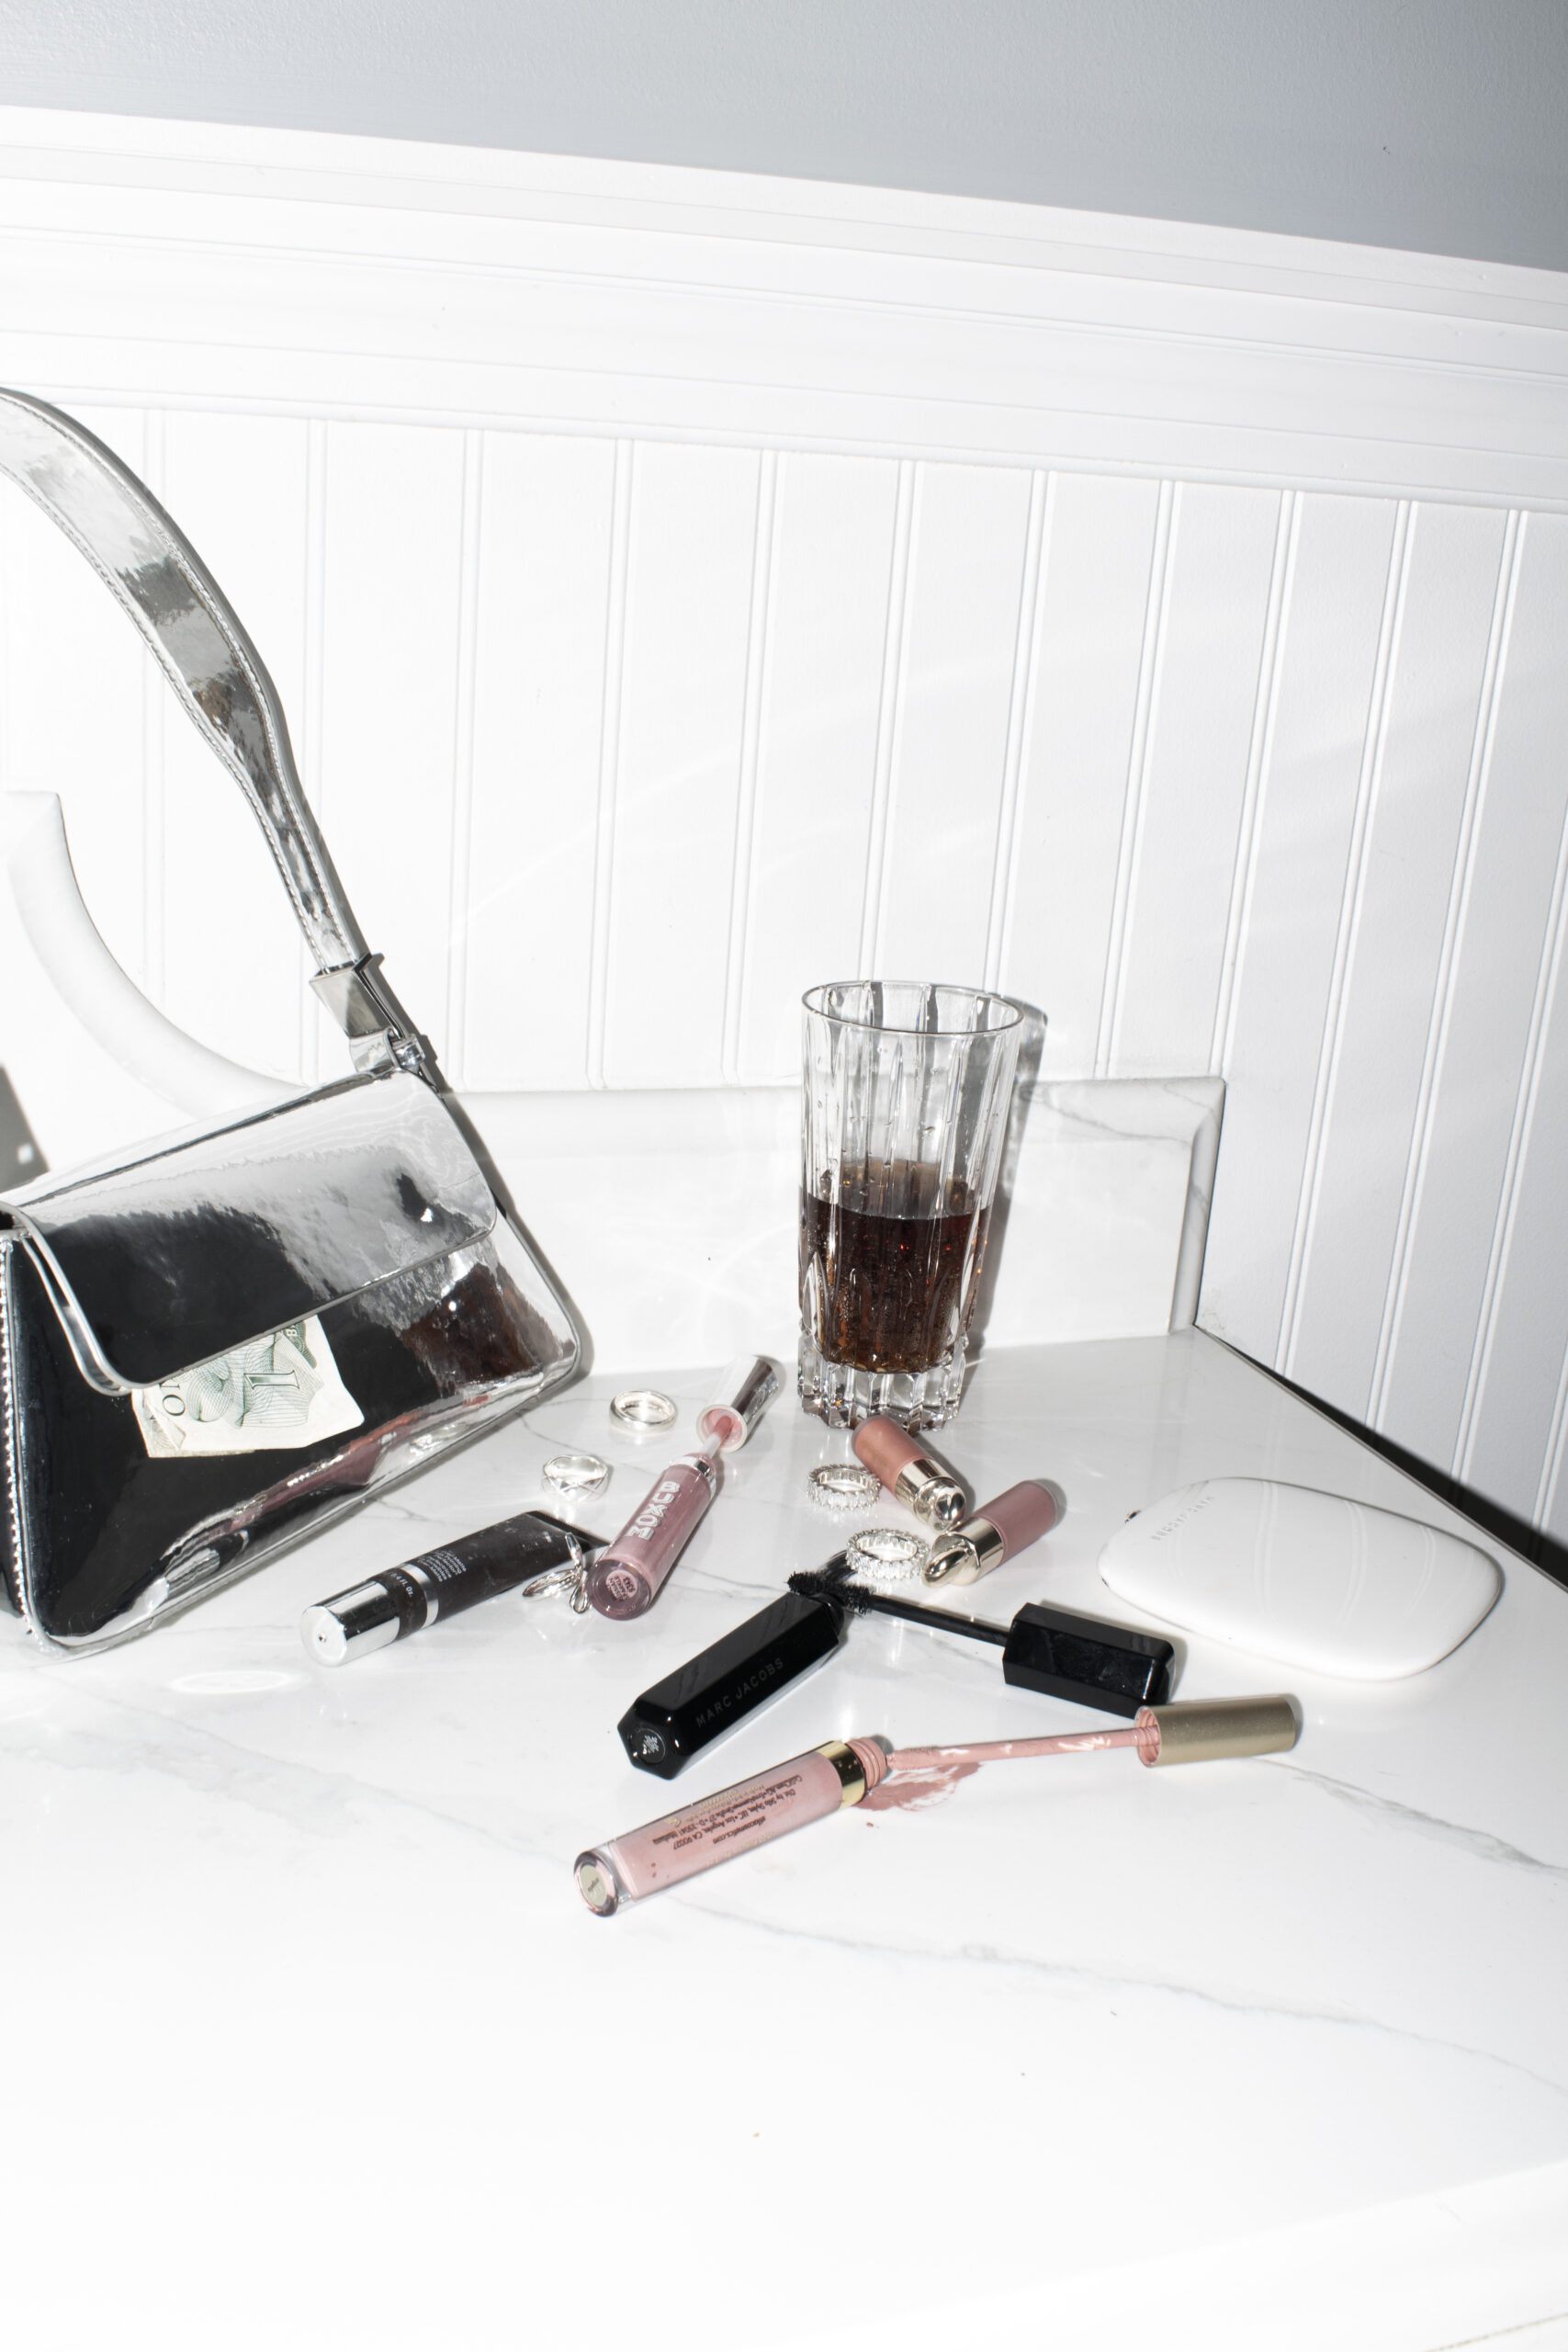 A flay lay image of makeup items splattered onto a white countertop with a glass of wine and a silver metallic purse on the left.